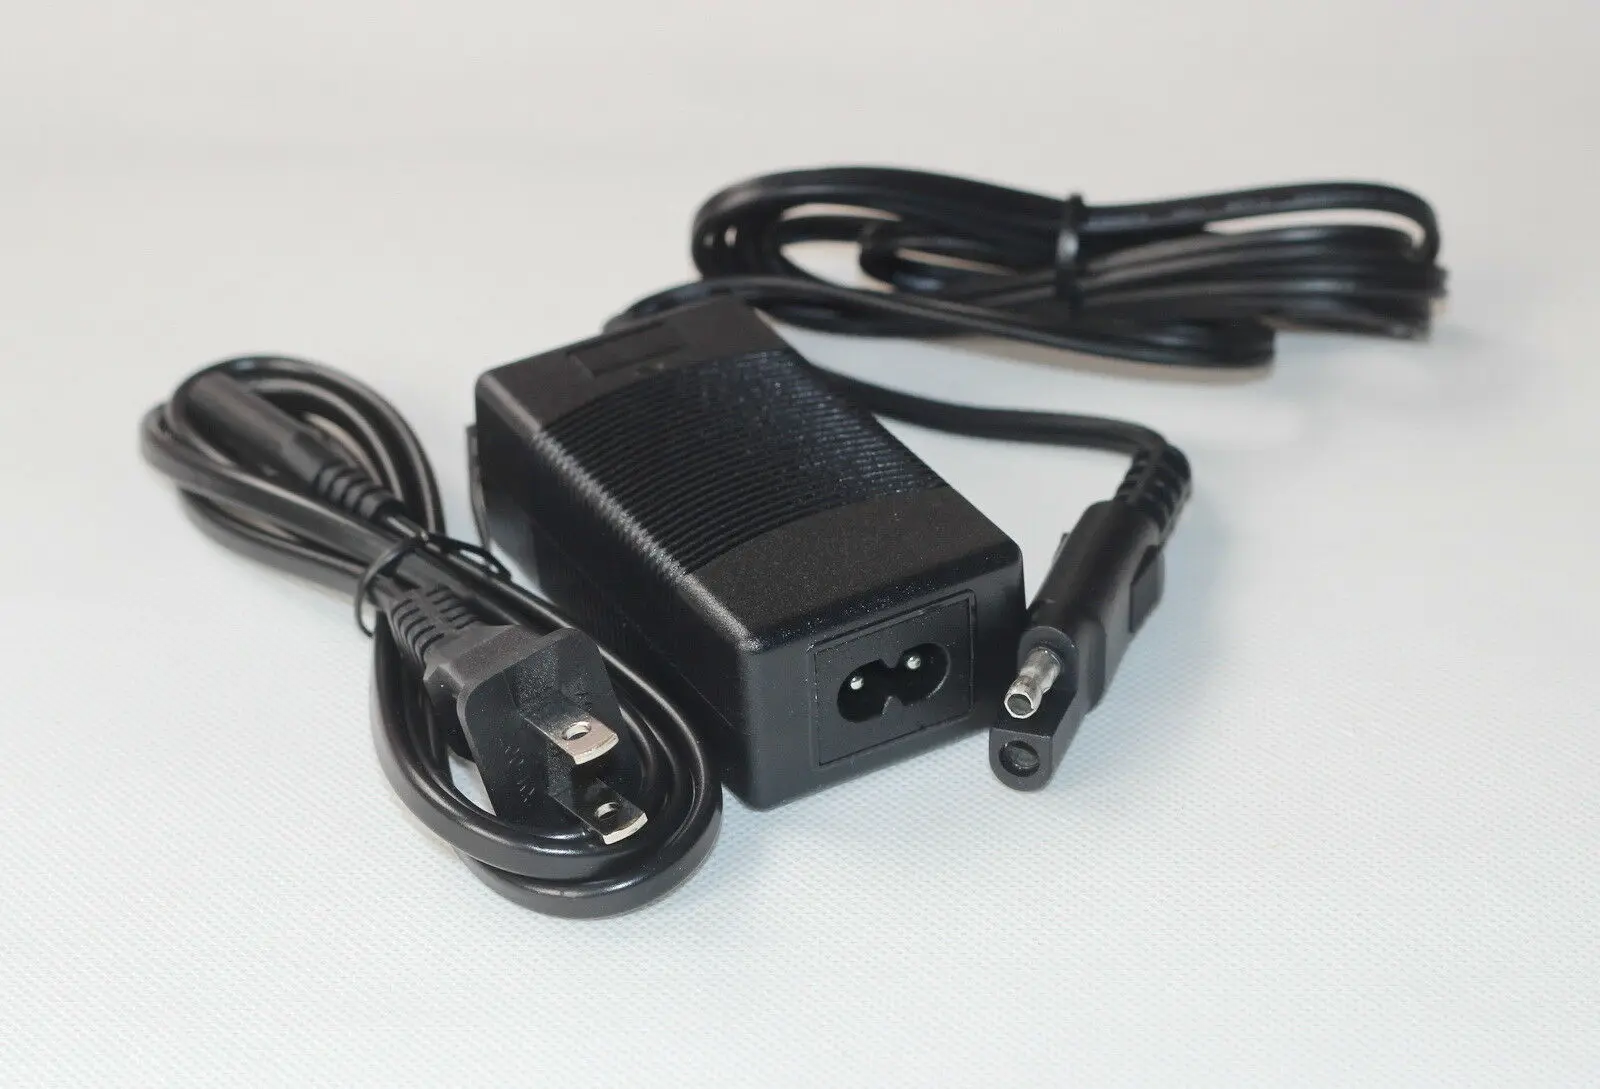 

NEW TOPCON GPS charger Adapter for Topcon GPS HiPer or HiPer Lite wired to SAE 2-pin connector